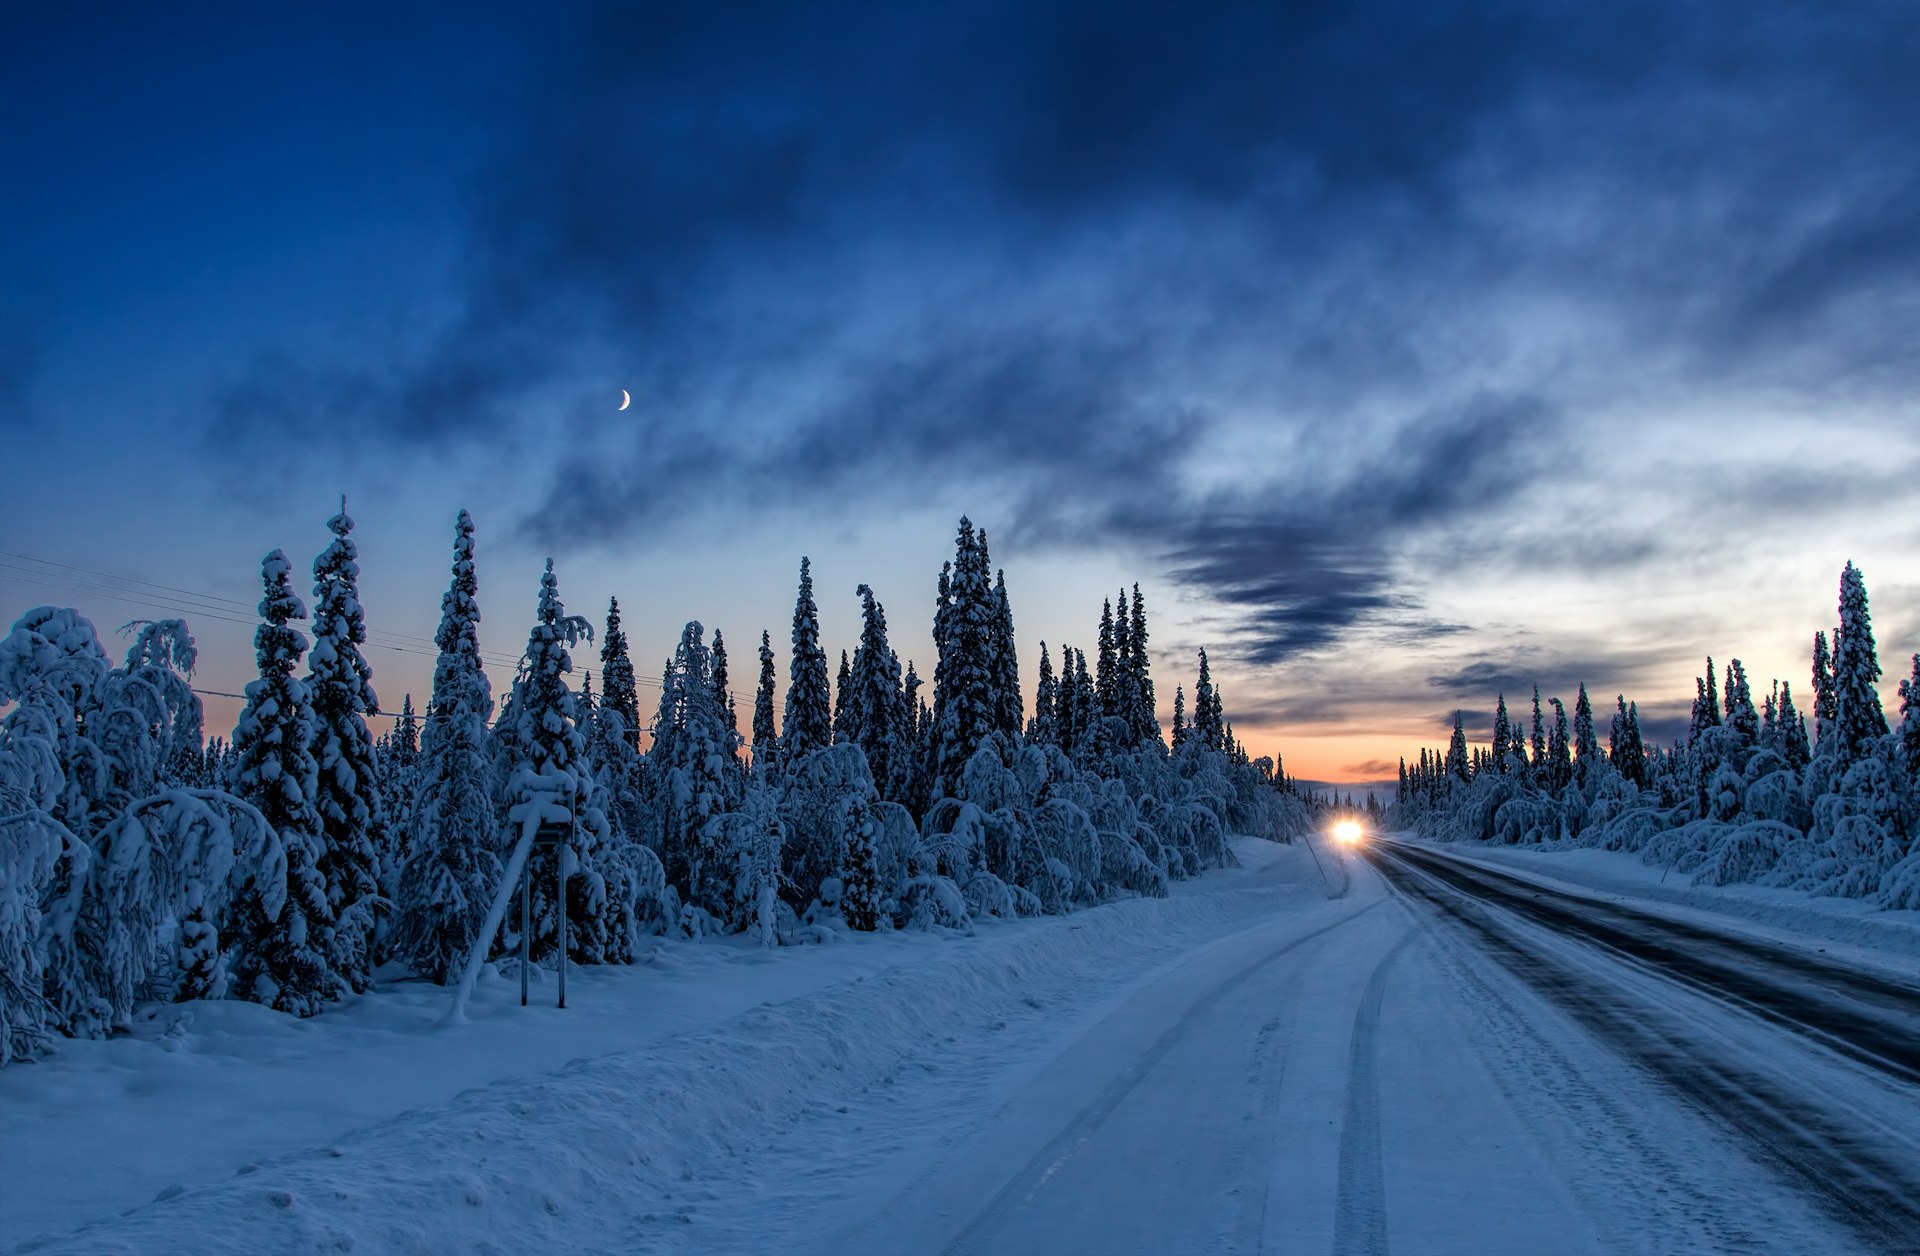 A snow covered road in arctic Sweden in late evening lined by trees covered in snow